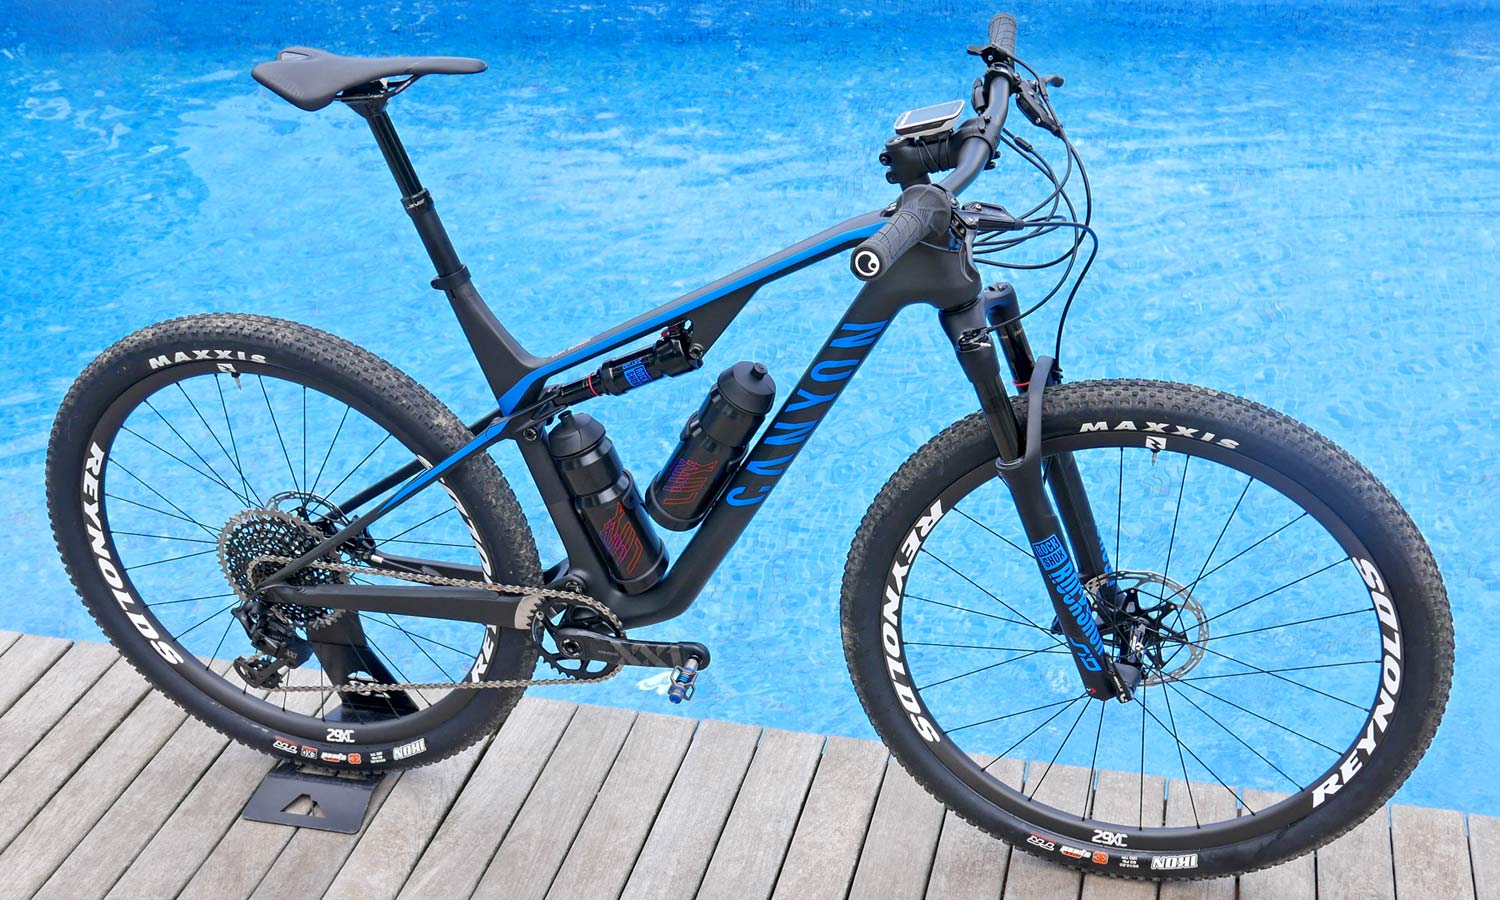 2019 Canyon Lux XC race 29er mountain bike – Spec, Pricing & Availability